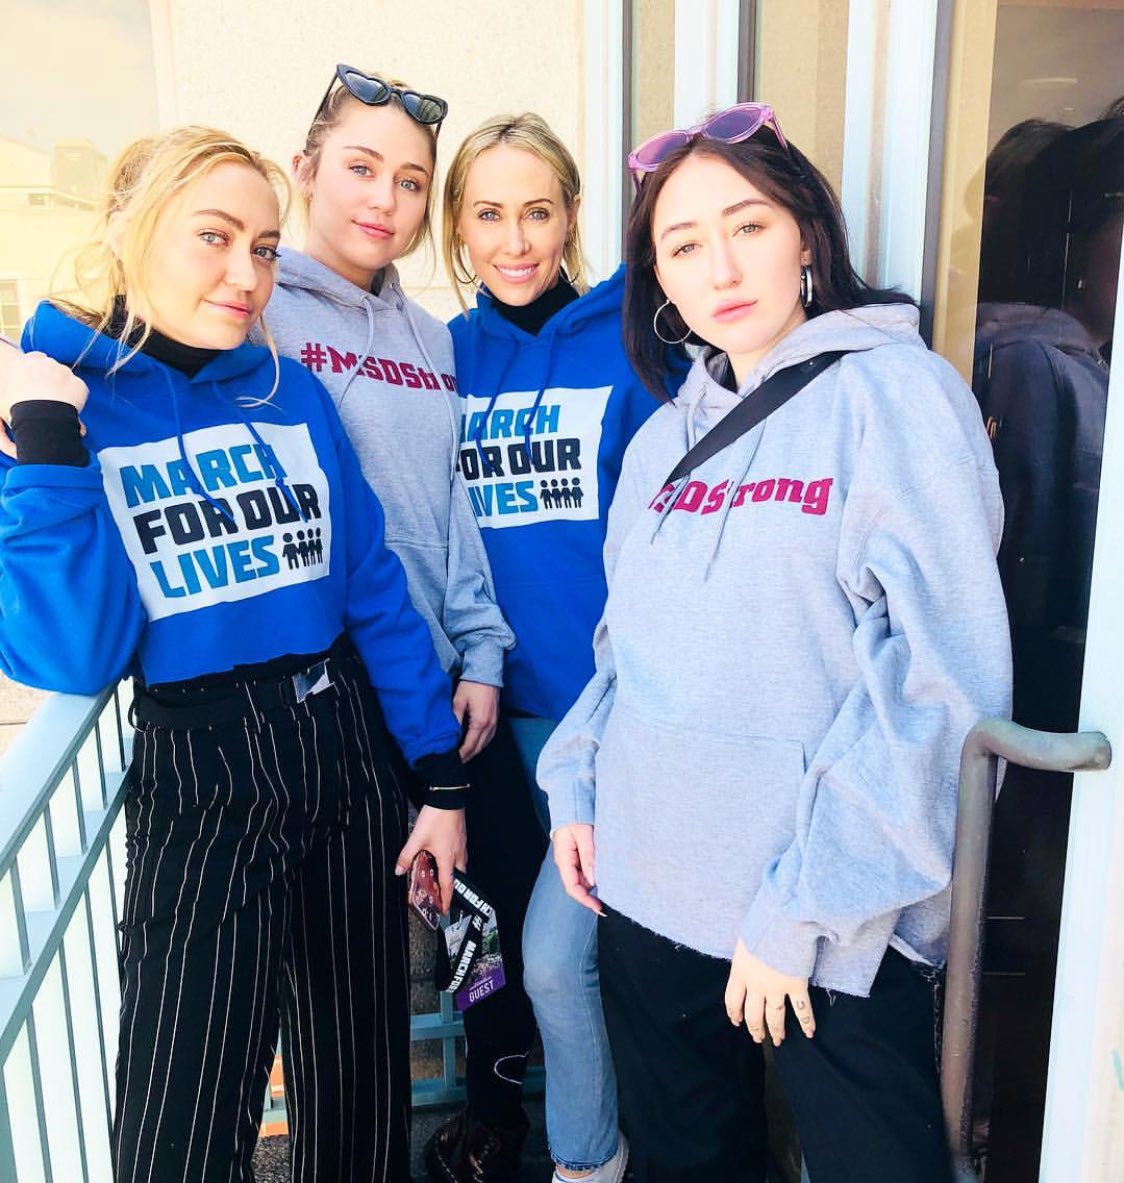 Surrounded by heroines! Lucky to be here at this moment in history with the ones I love! #MarchForOurLives https://t.co/xVF4sDVofh